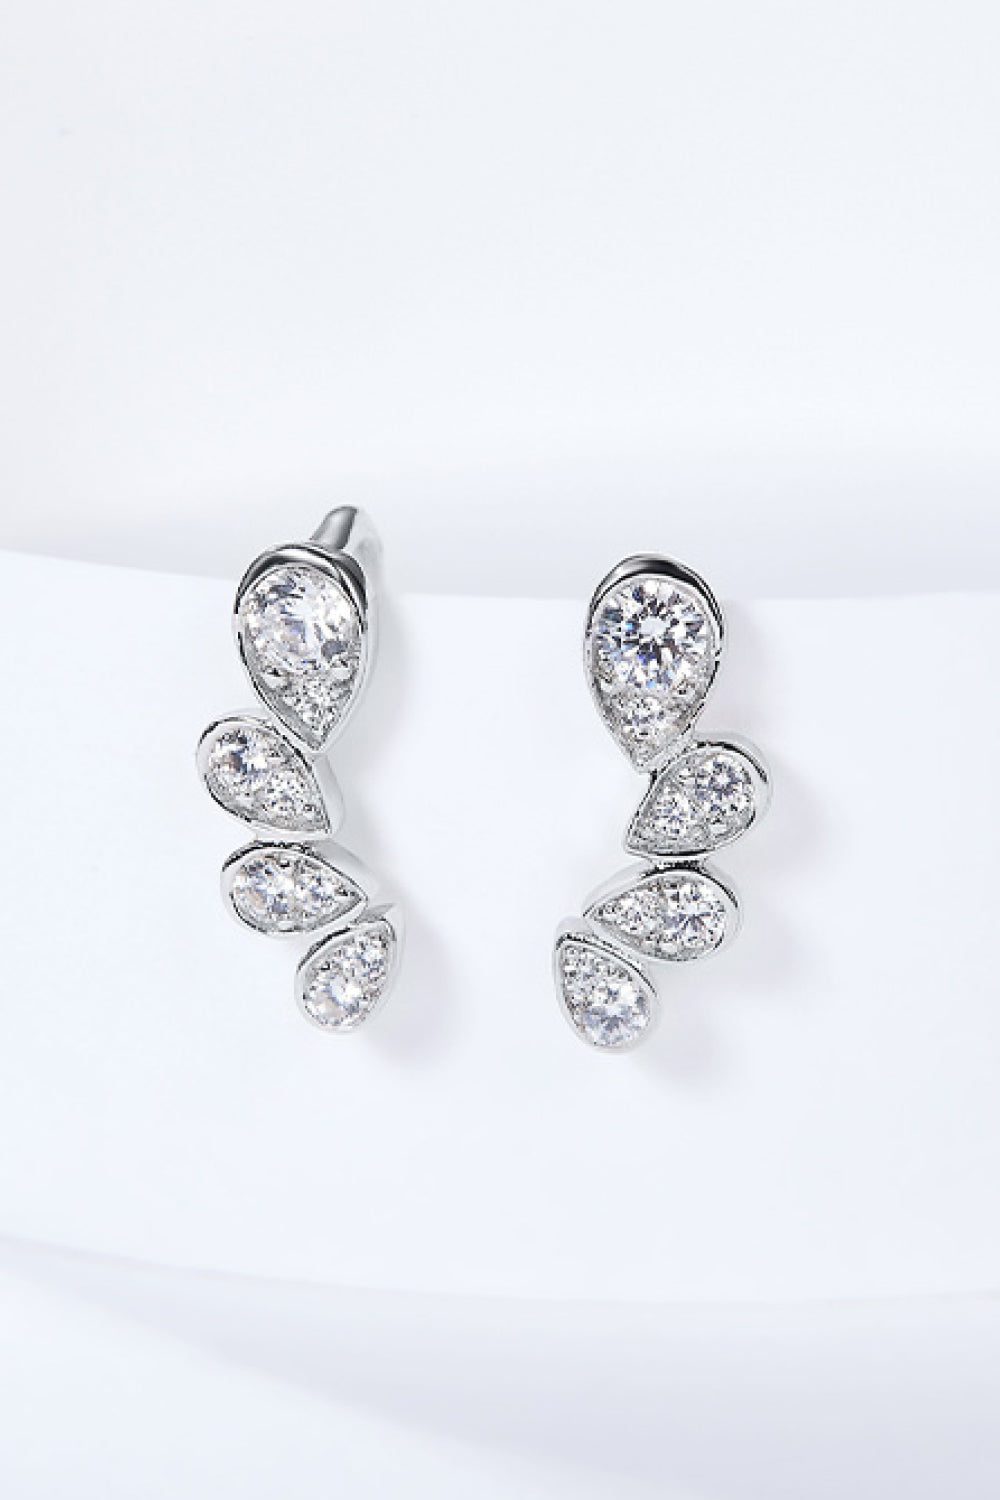 Pear Shape Moissanite Earrings-Earrings-Inspired by Justeen-Women's Clothing Boutique in Chicago, Illinois